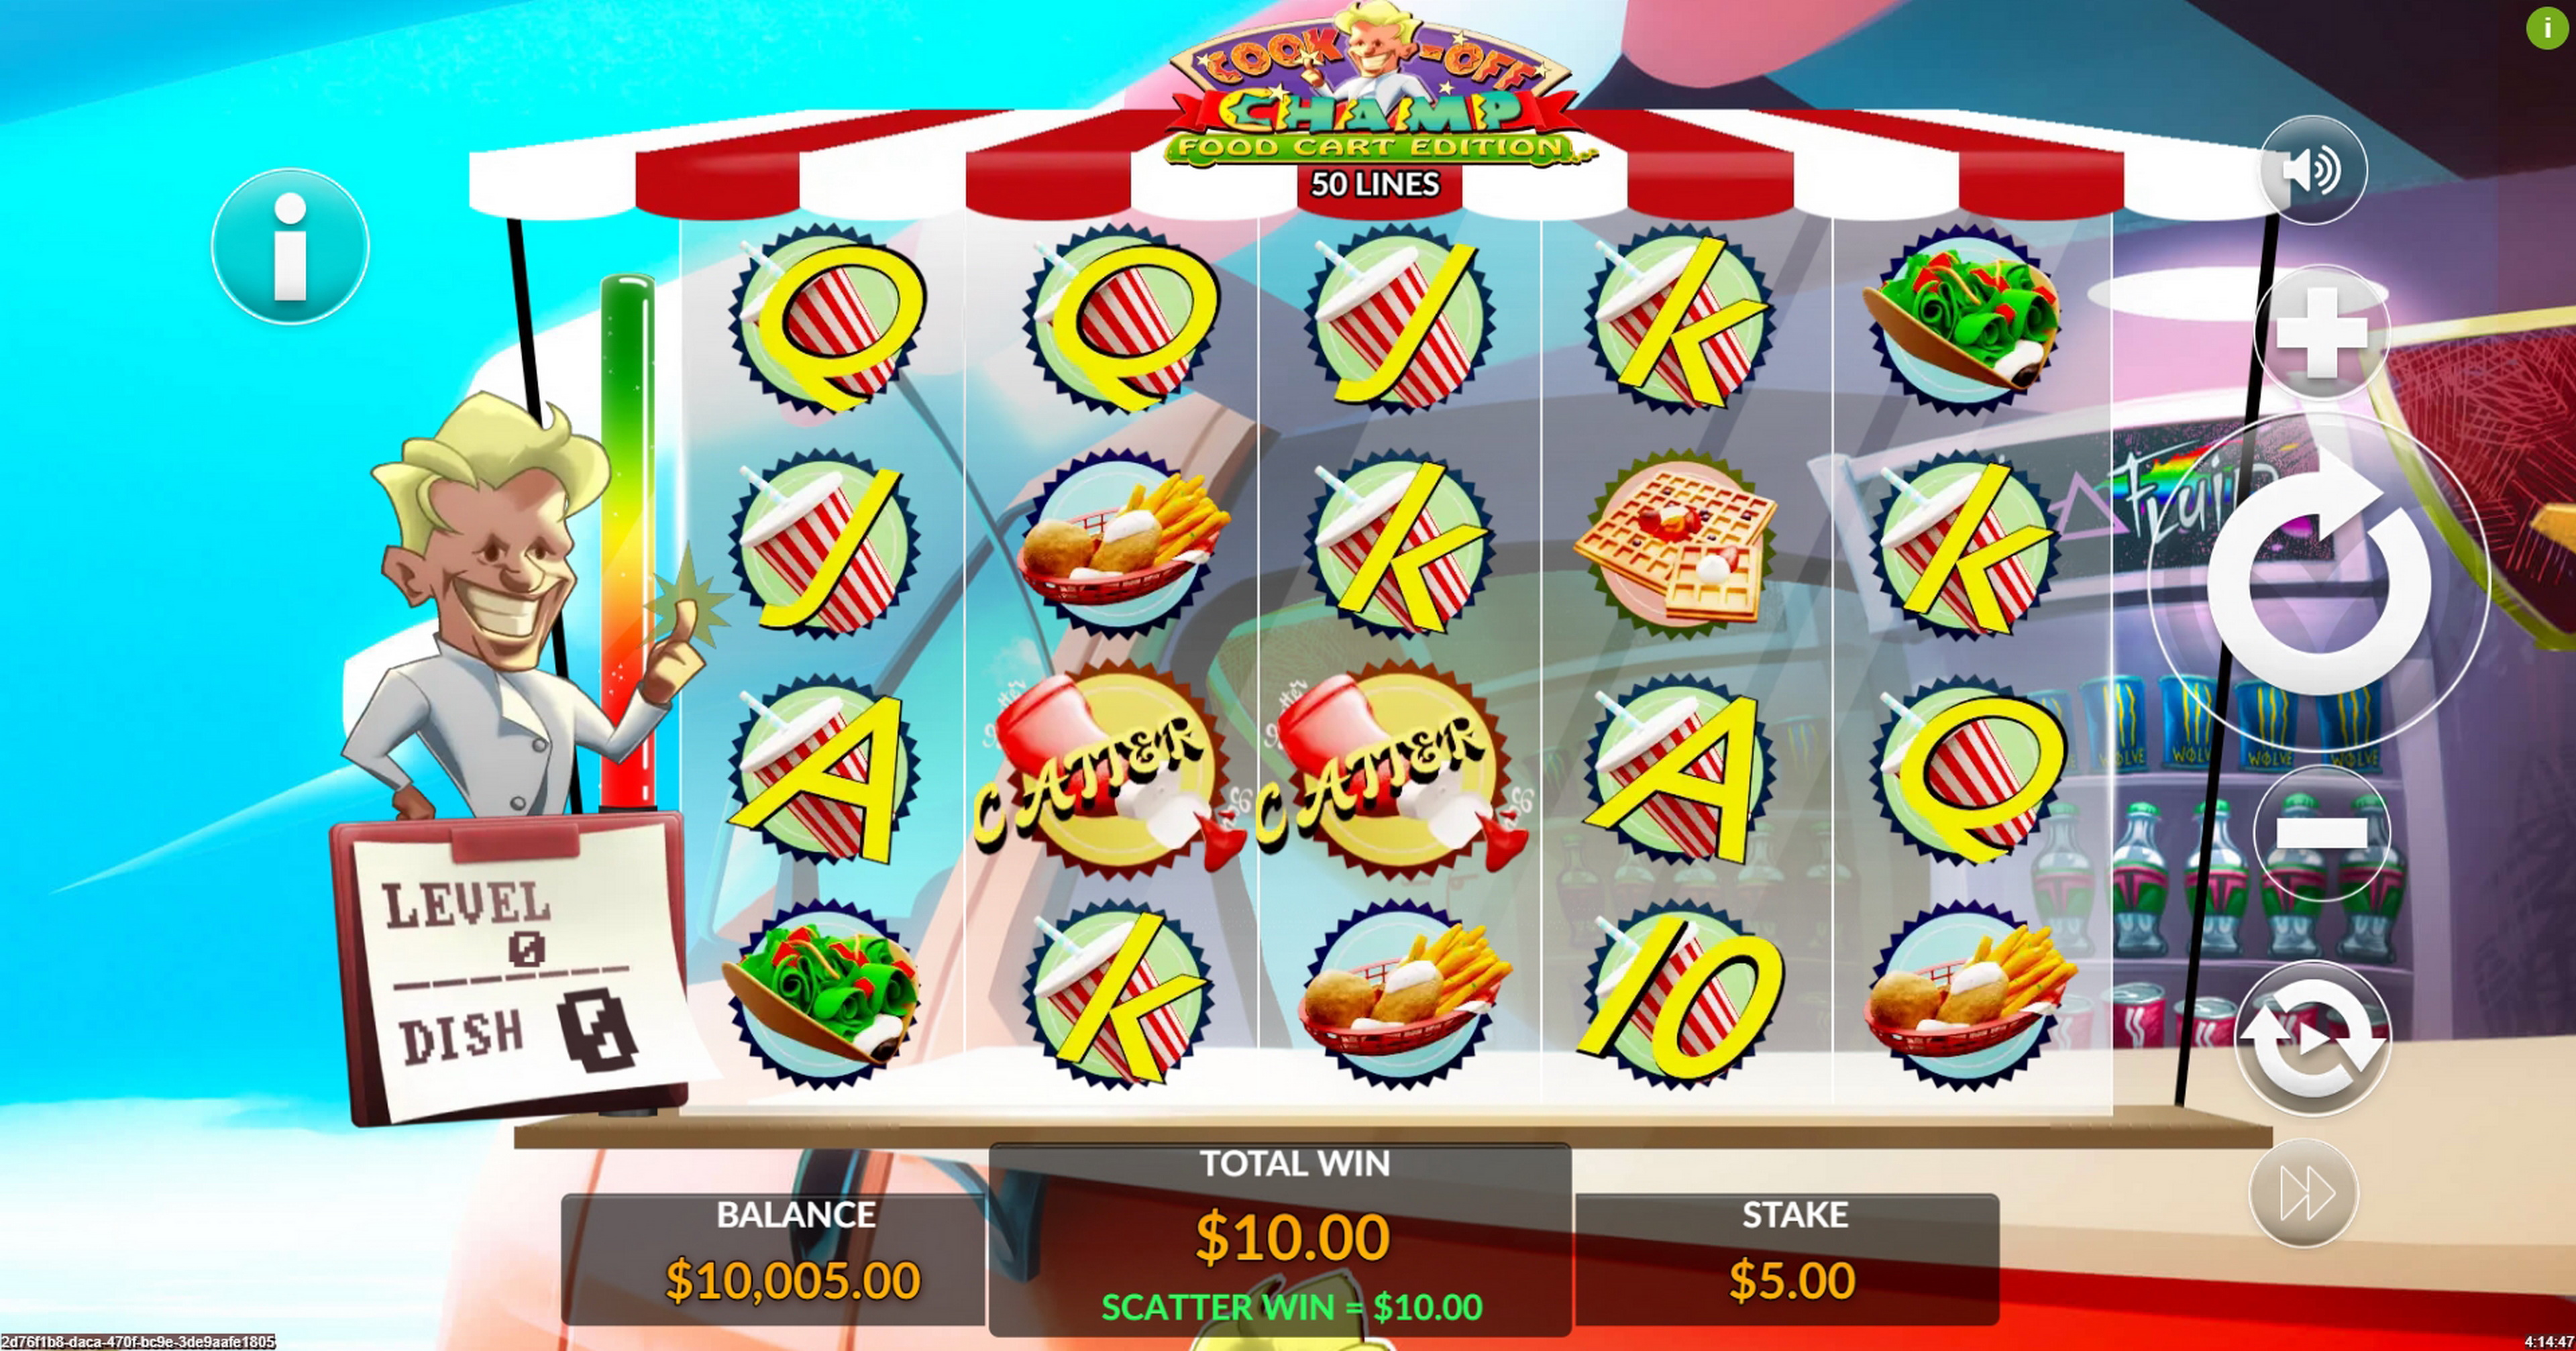 Win Money in Cook-Off Champ Free Slot Game by Maverick